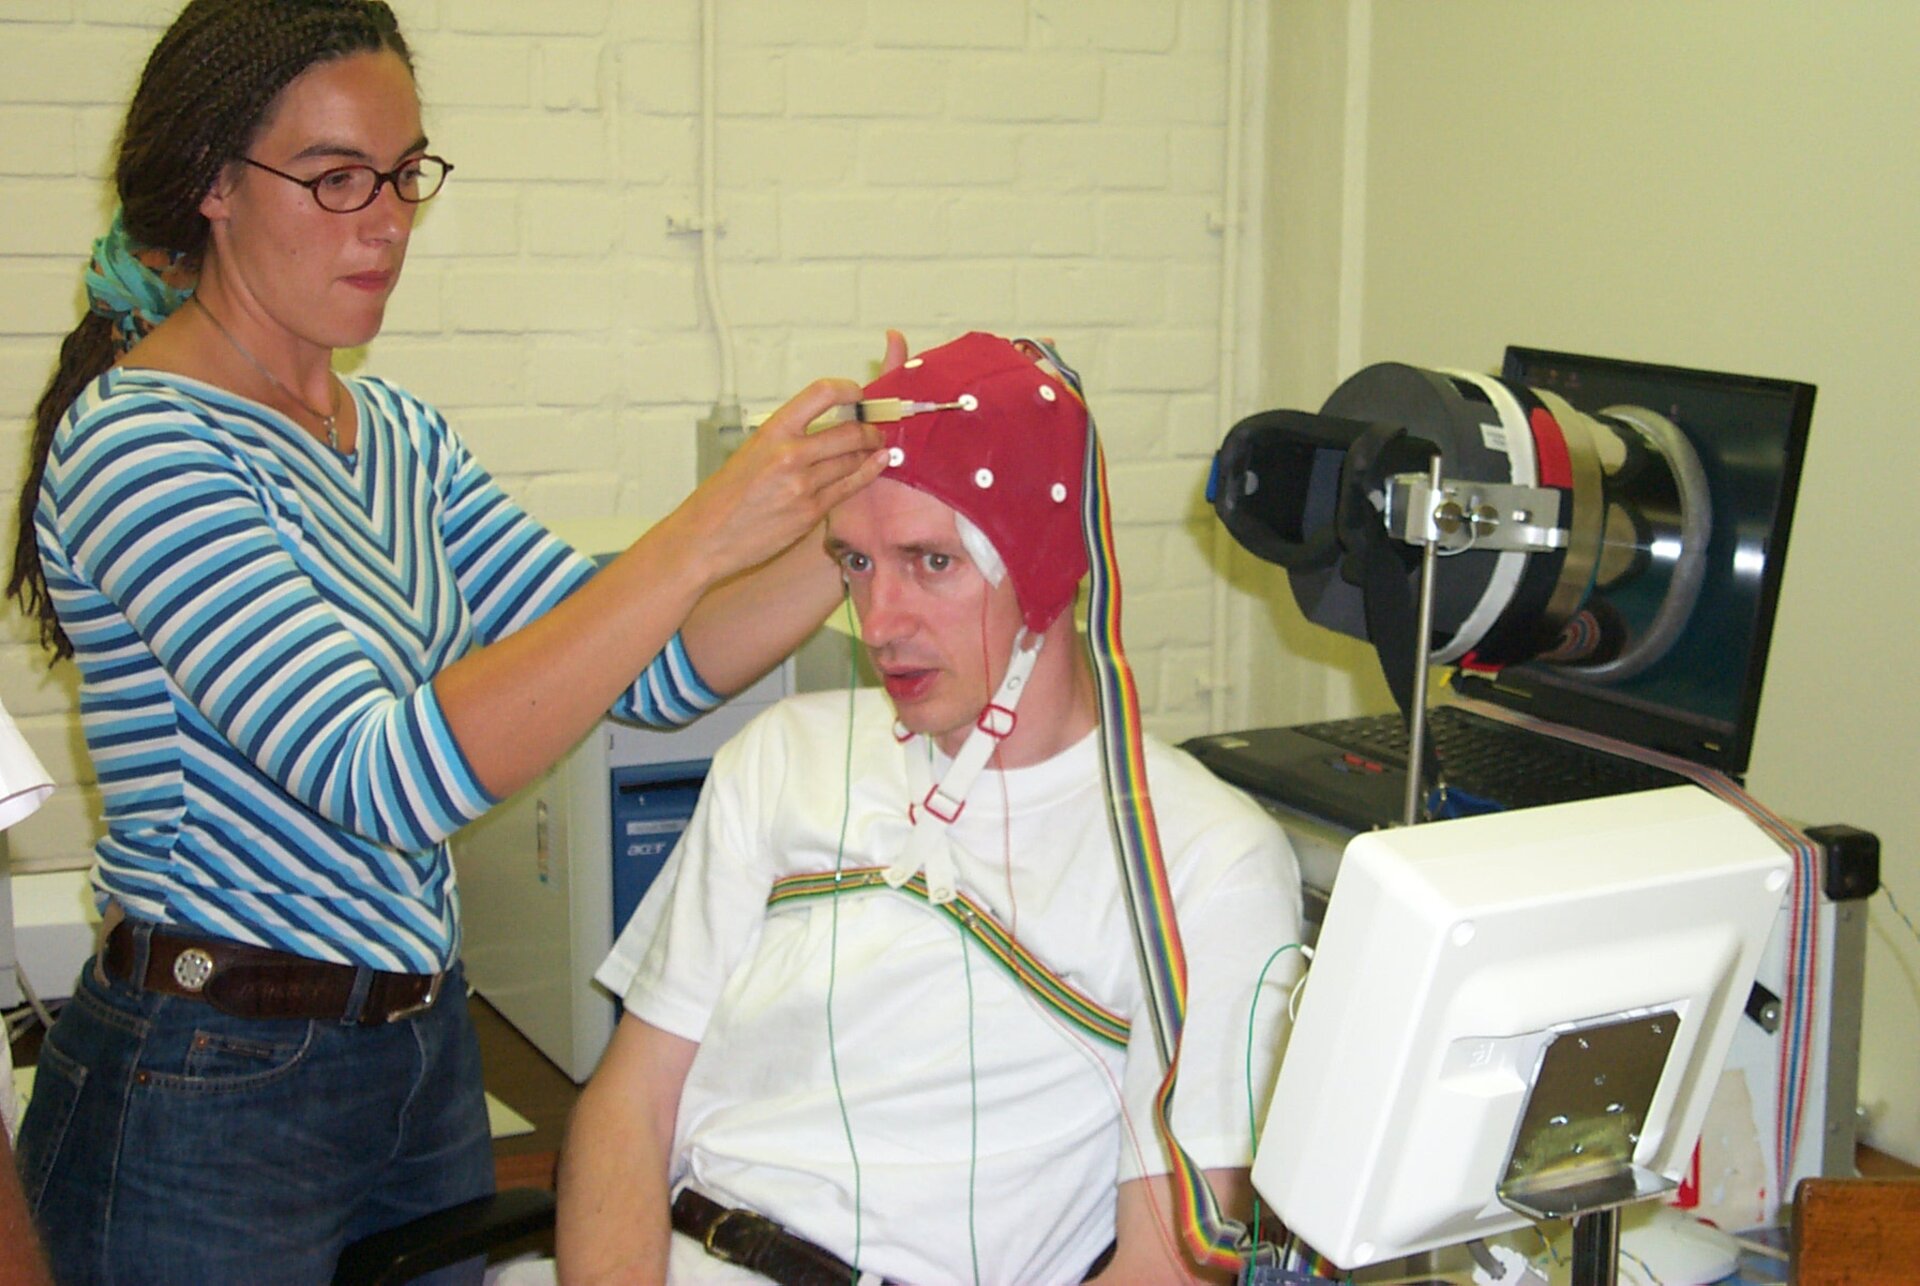 Baseline data collection and training for Neurocog